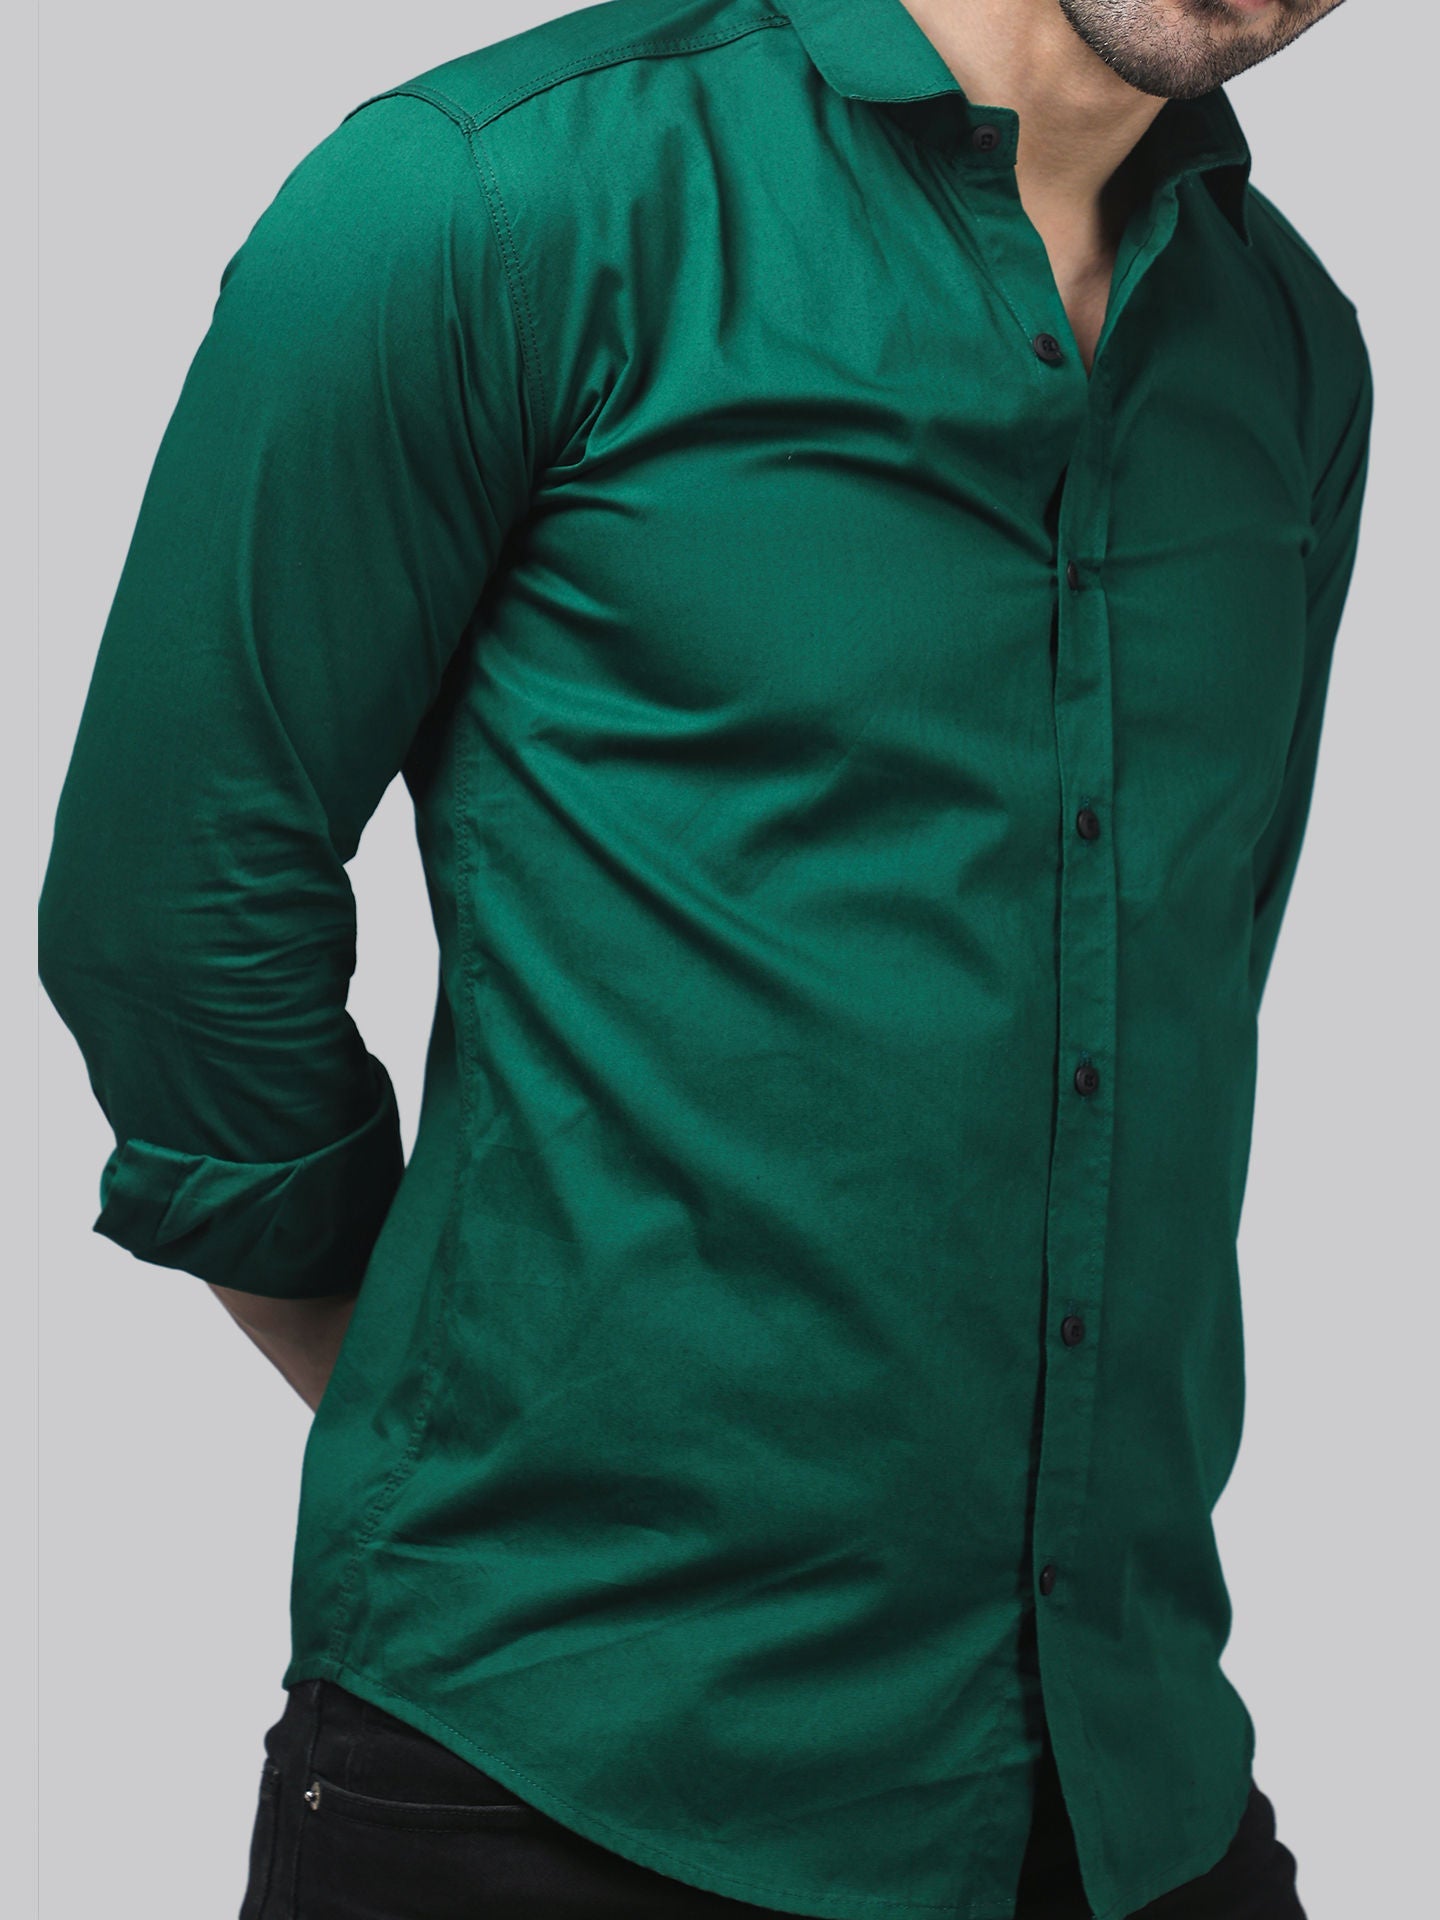 Grunge TryBuy Premium Green Cotton Casual Shirt for Men - TryBuy® USA🇺🇸